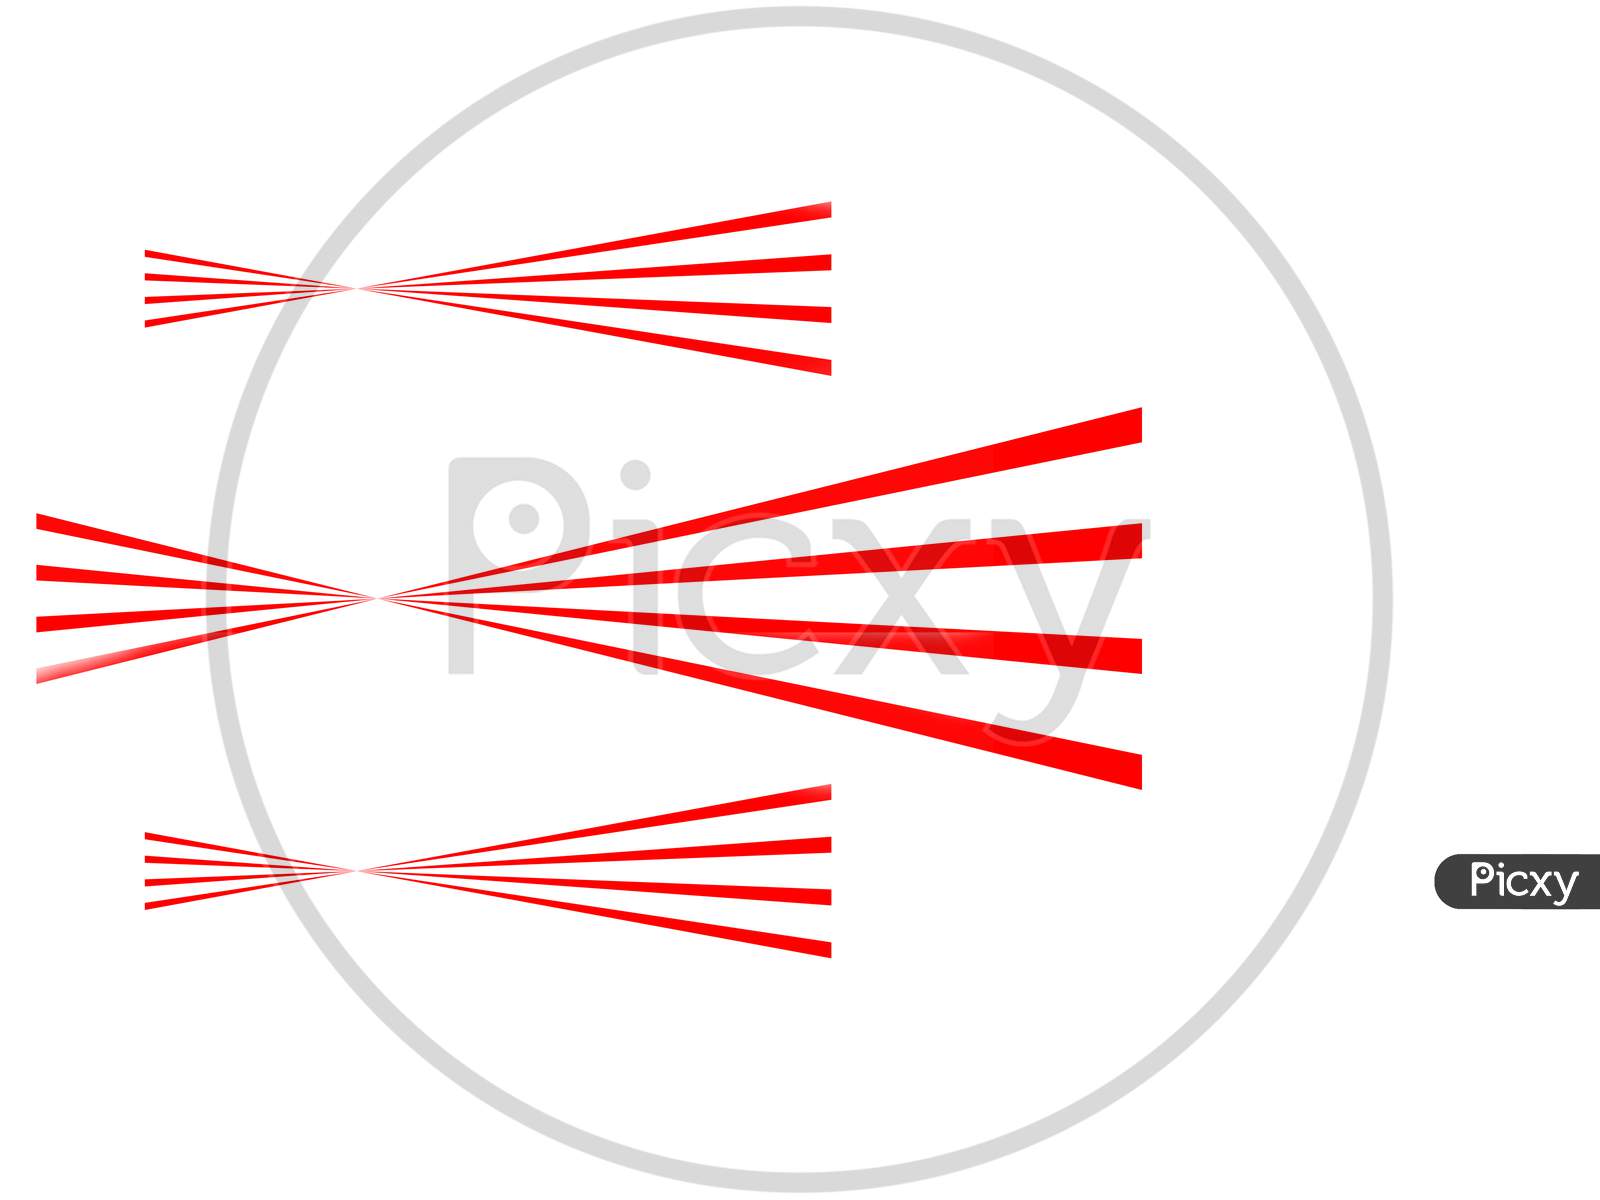 Abstract illustration of three red lines with a twist and duplicated with two smaller ones.